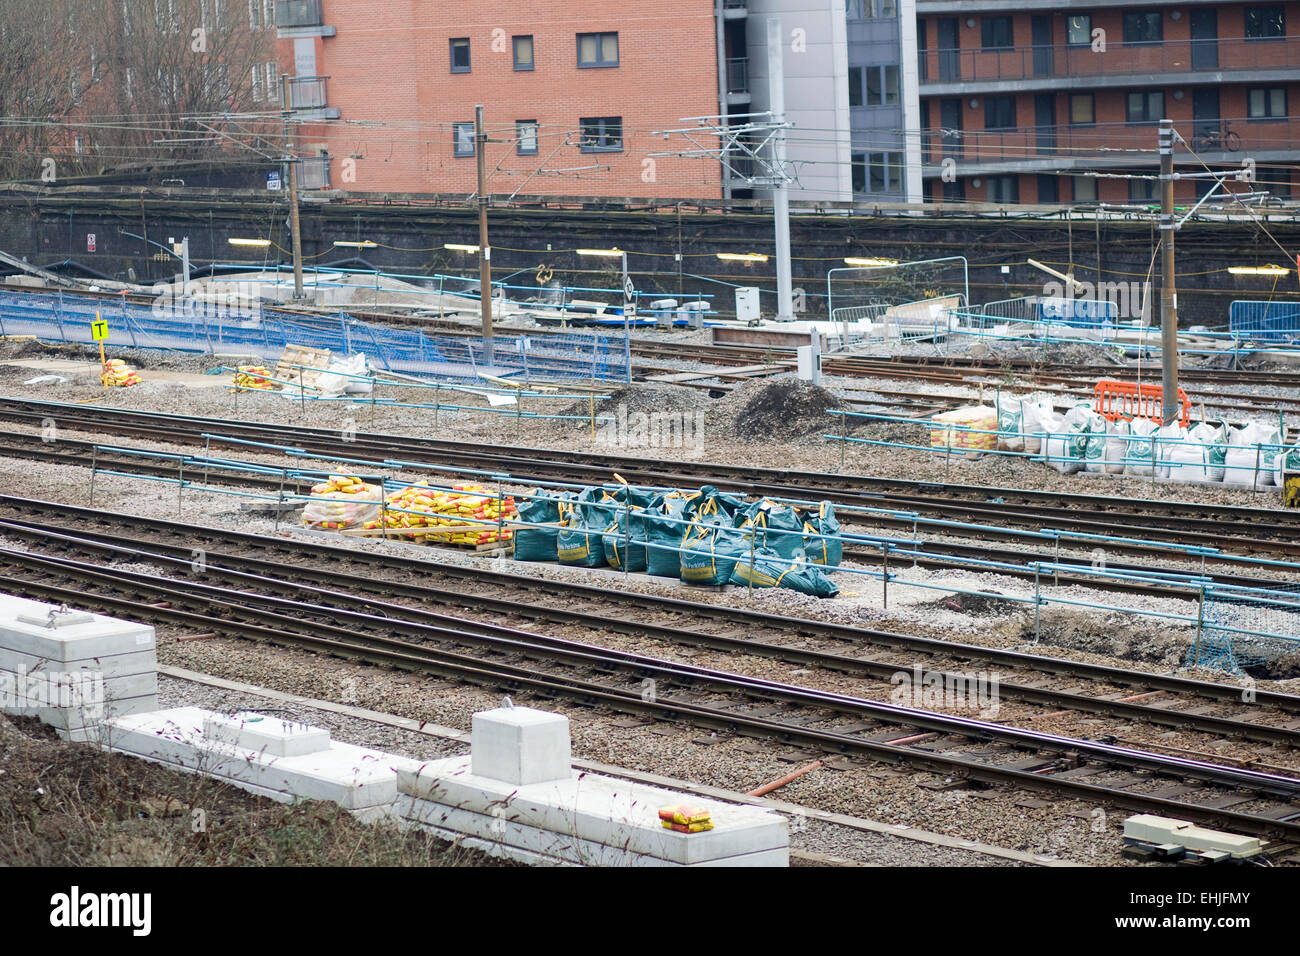 Construction on the railway lines in england Stock Photo